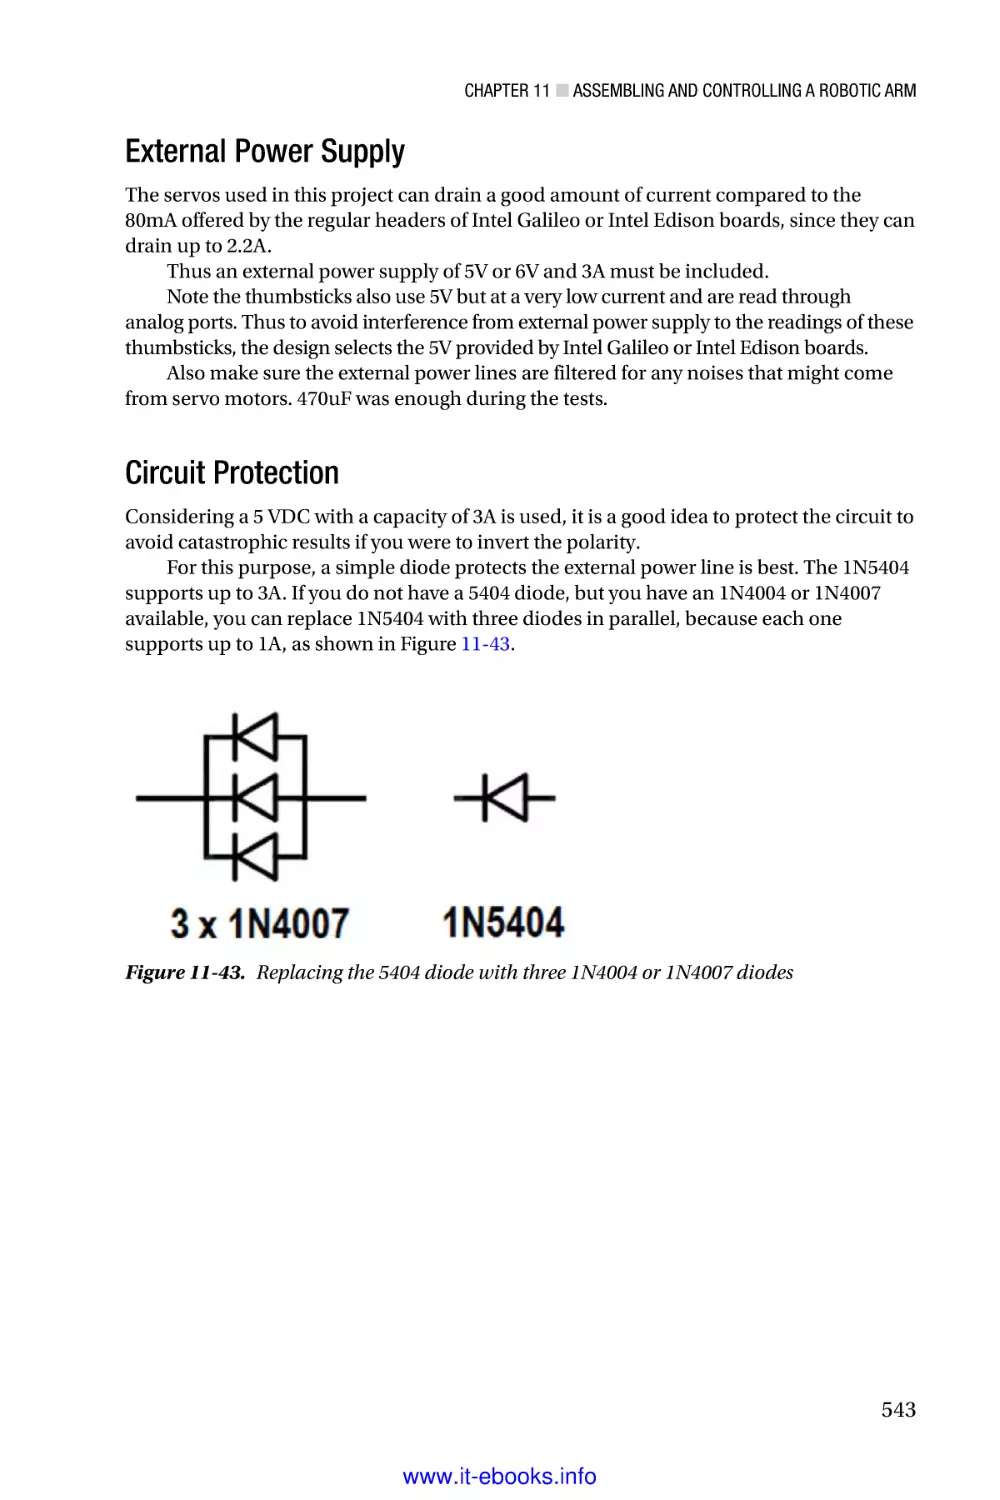 External Power Supply
Circuit Protection